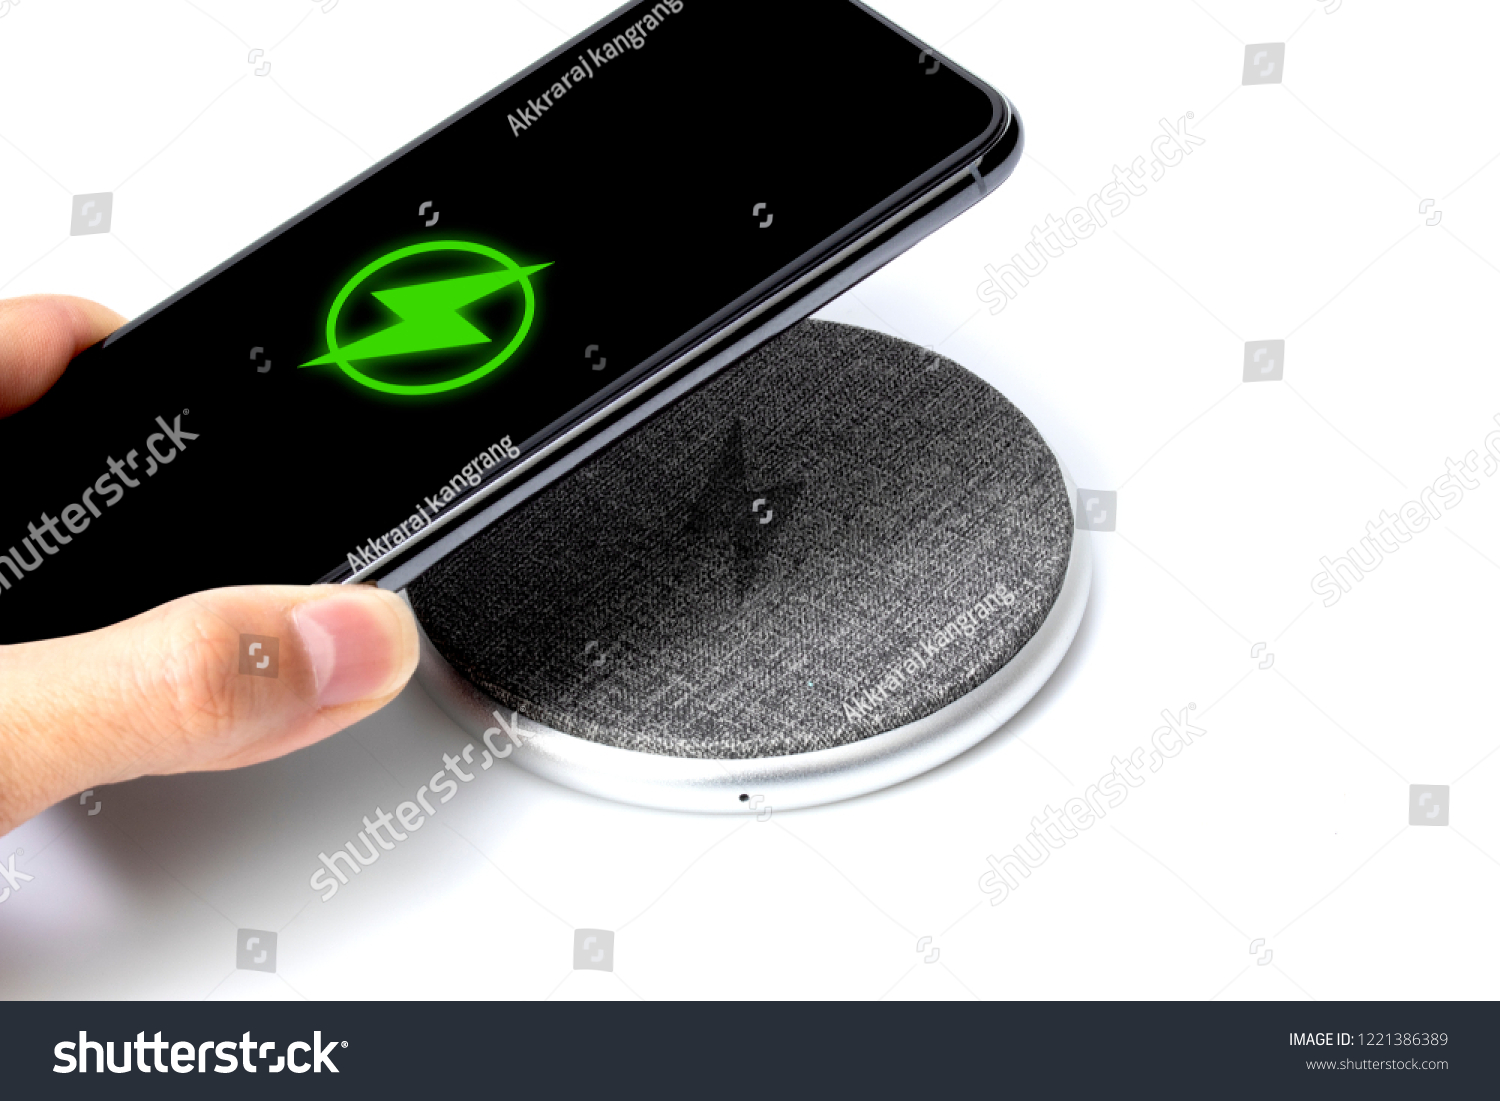 The Wireless Charger #1221386389